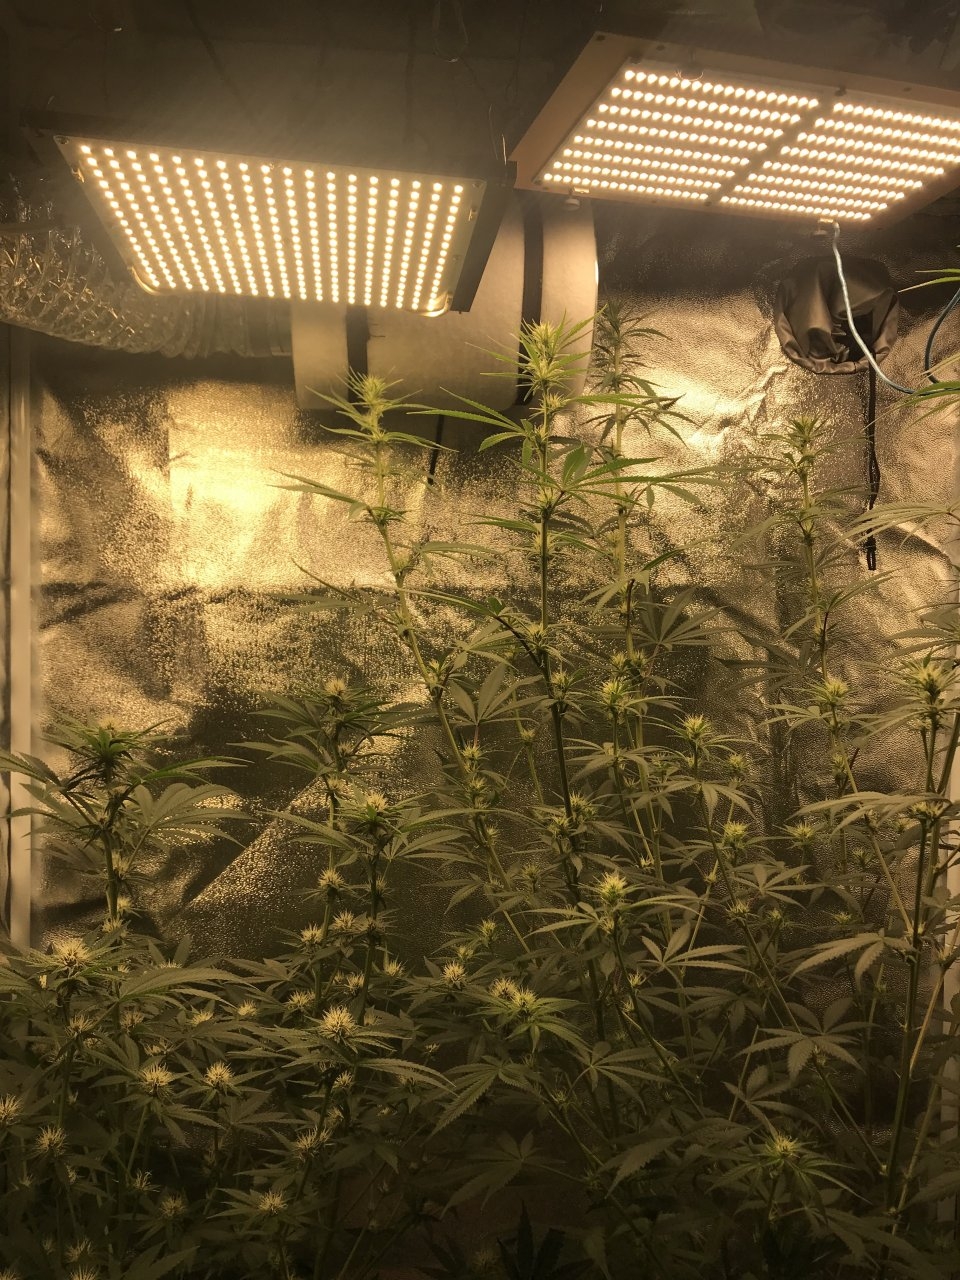 New light on the left HLG288 on the right